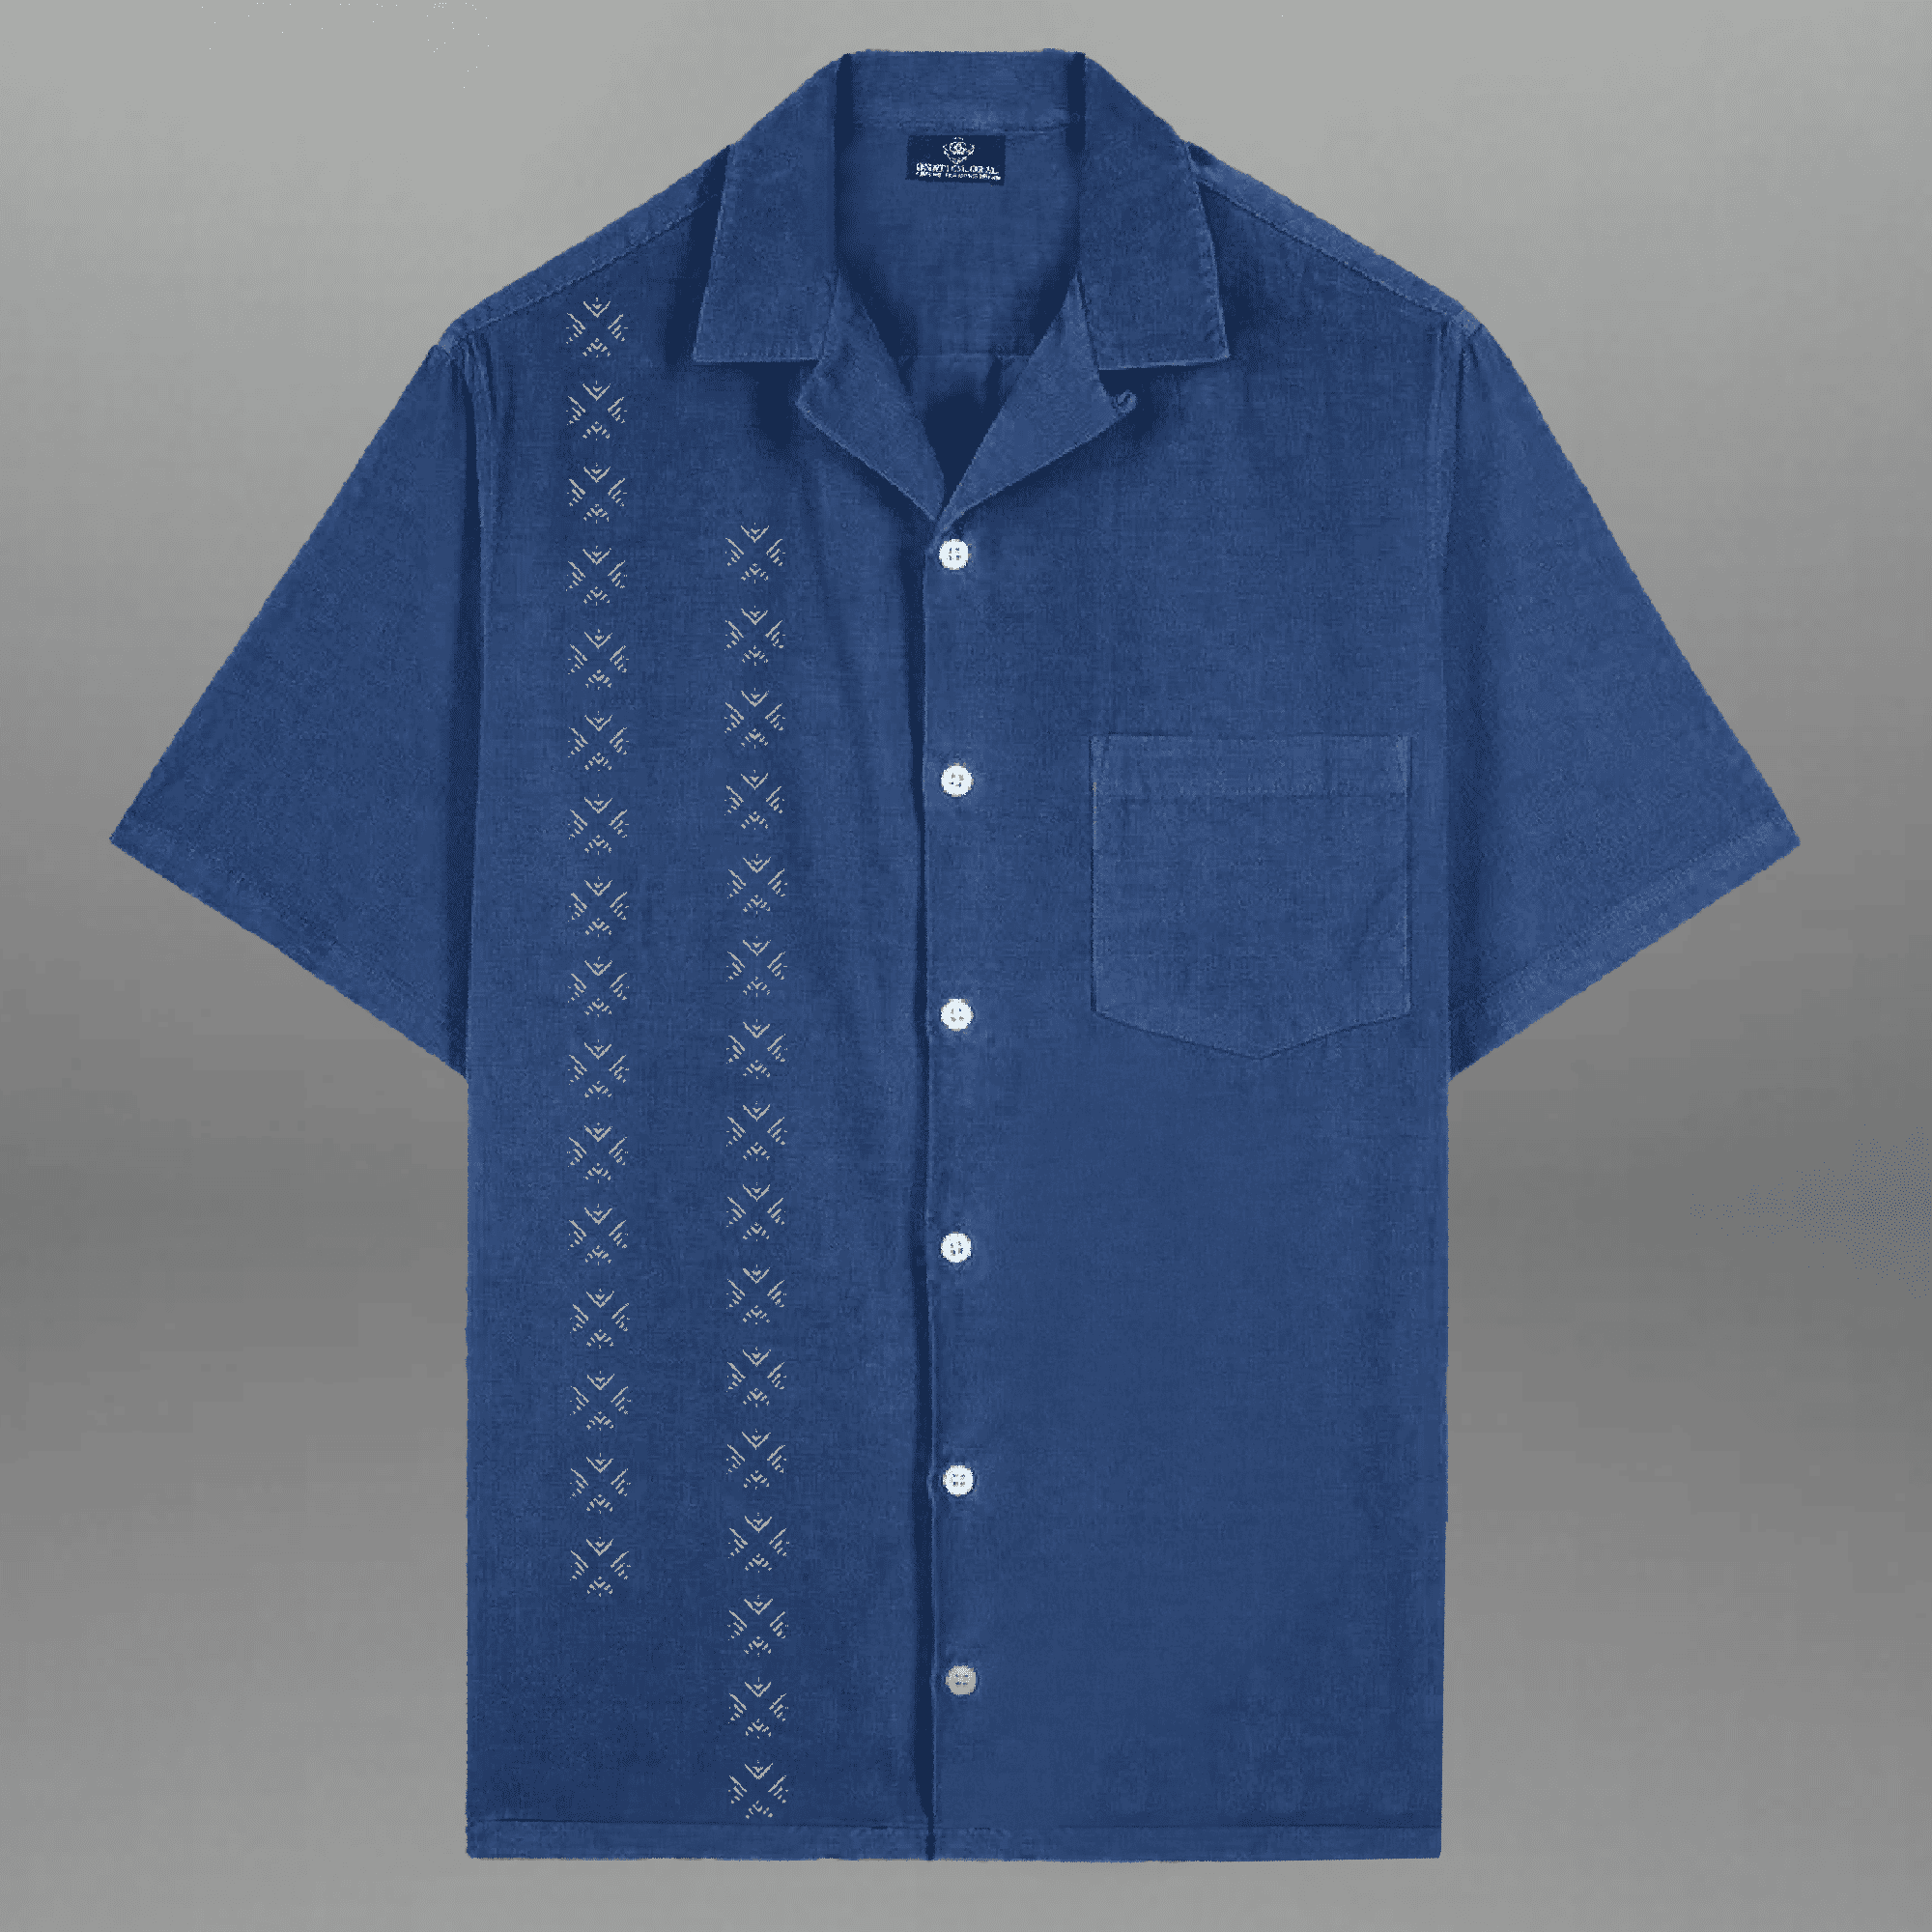 Men's Blue Embroidered Camp Collar Shirt with a Pocket-RMS046